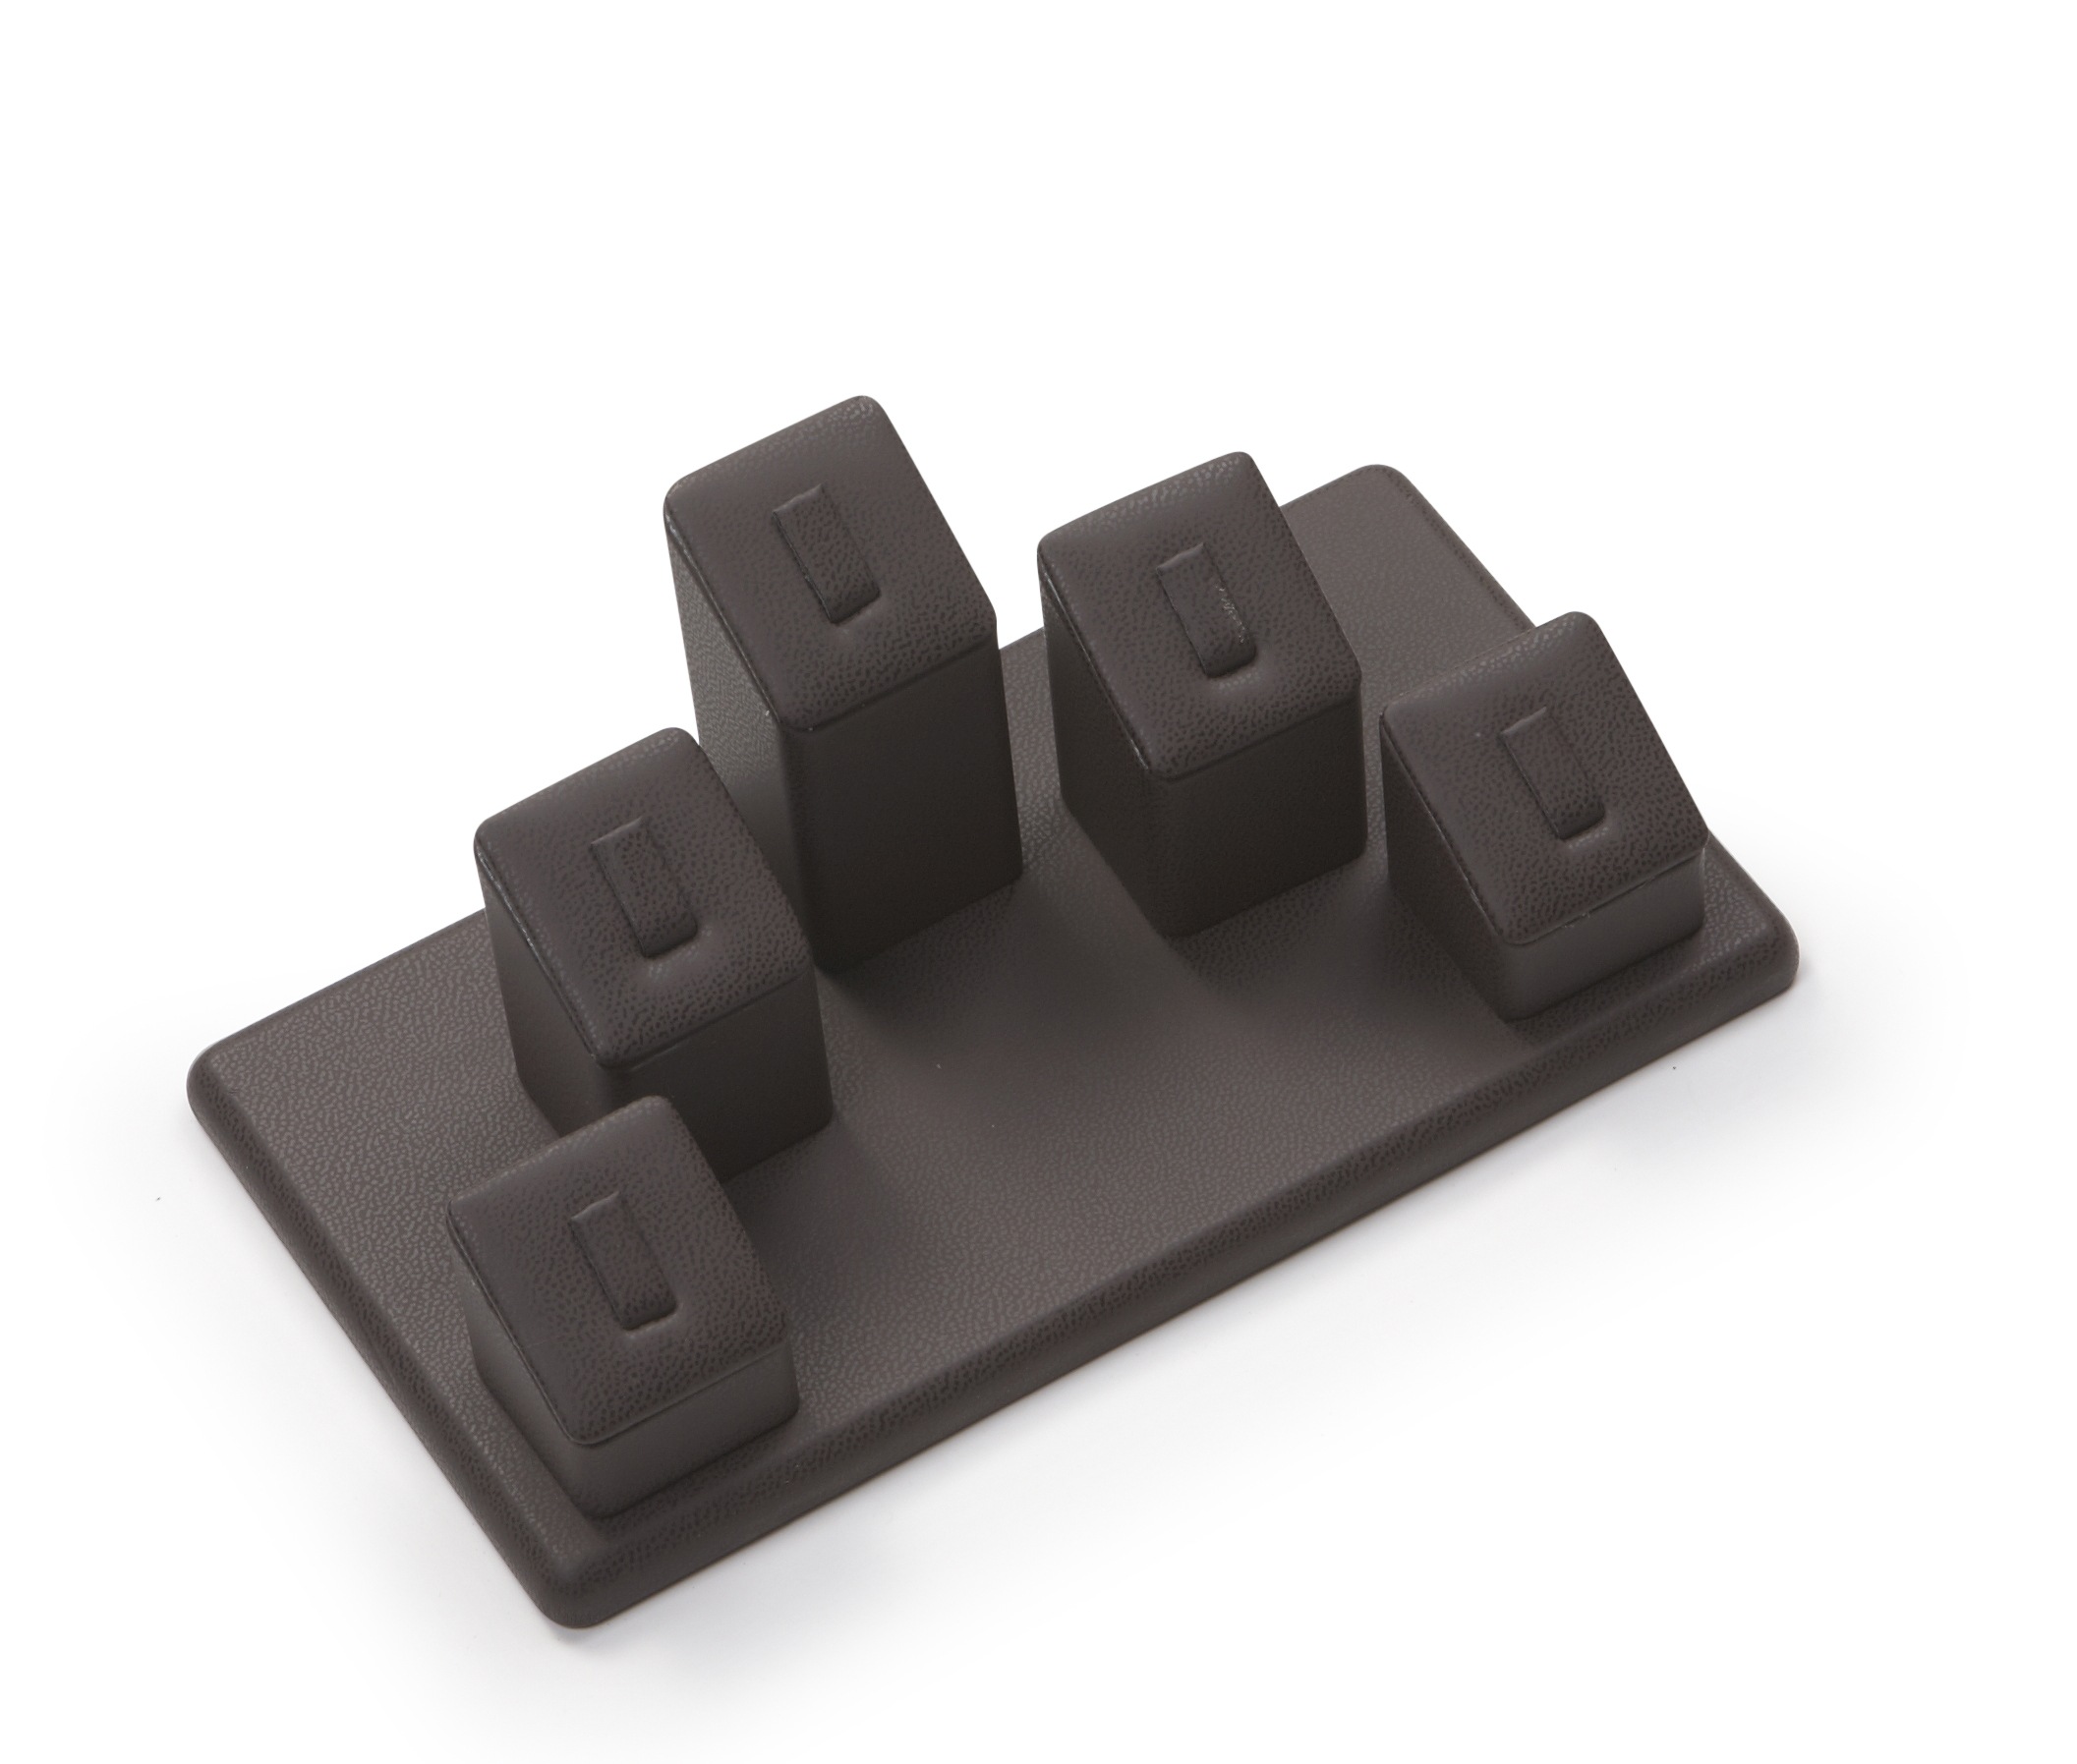 Chocolate Leatherette 5 Clip Ring Tower